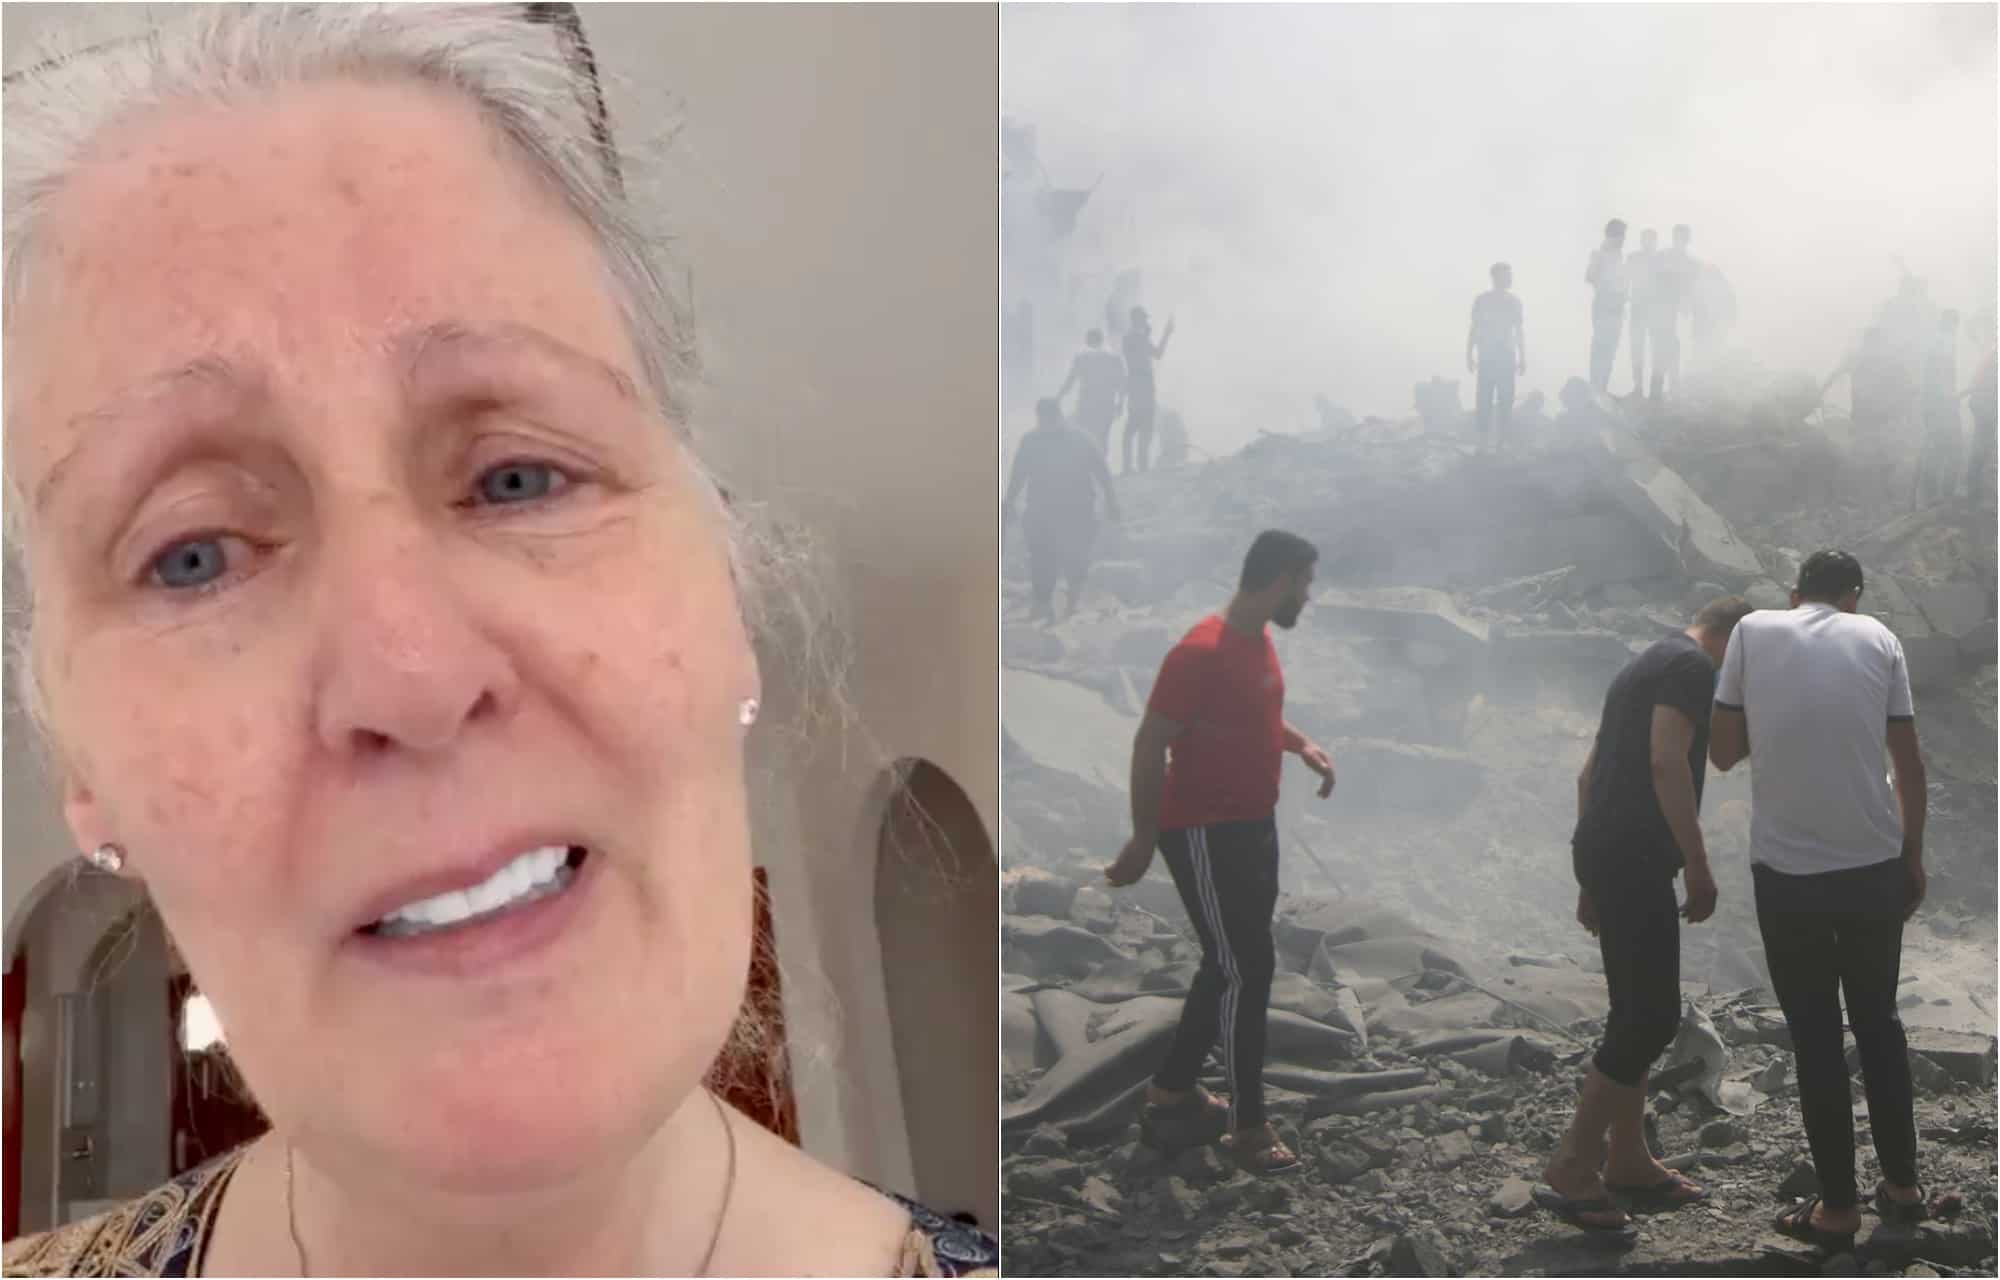 Yousaf’s mother-in-law asks ‘where is humanity?’ in tearful video from Gaza